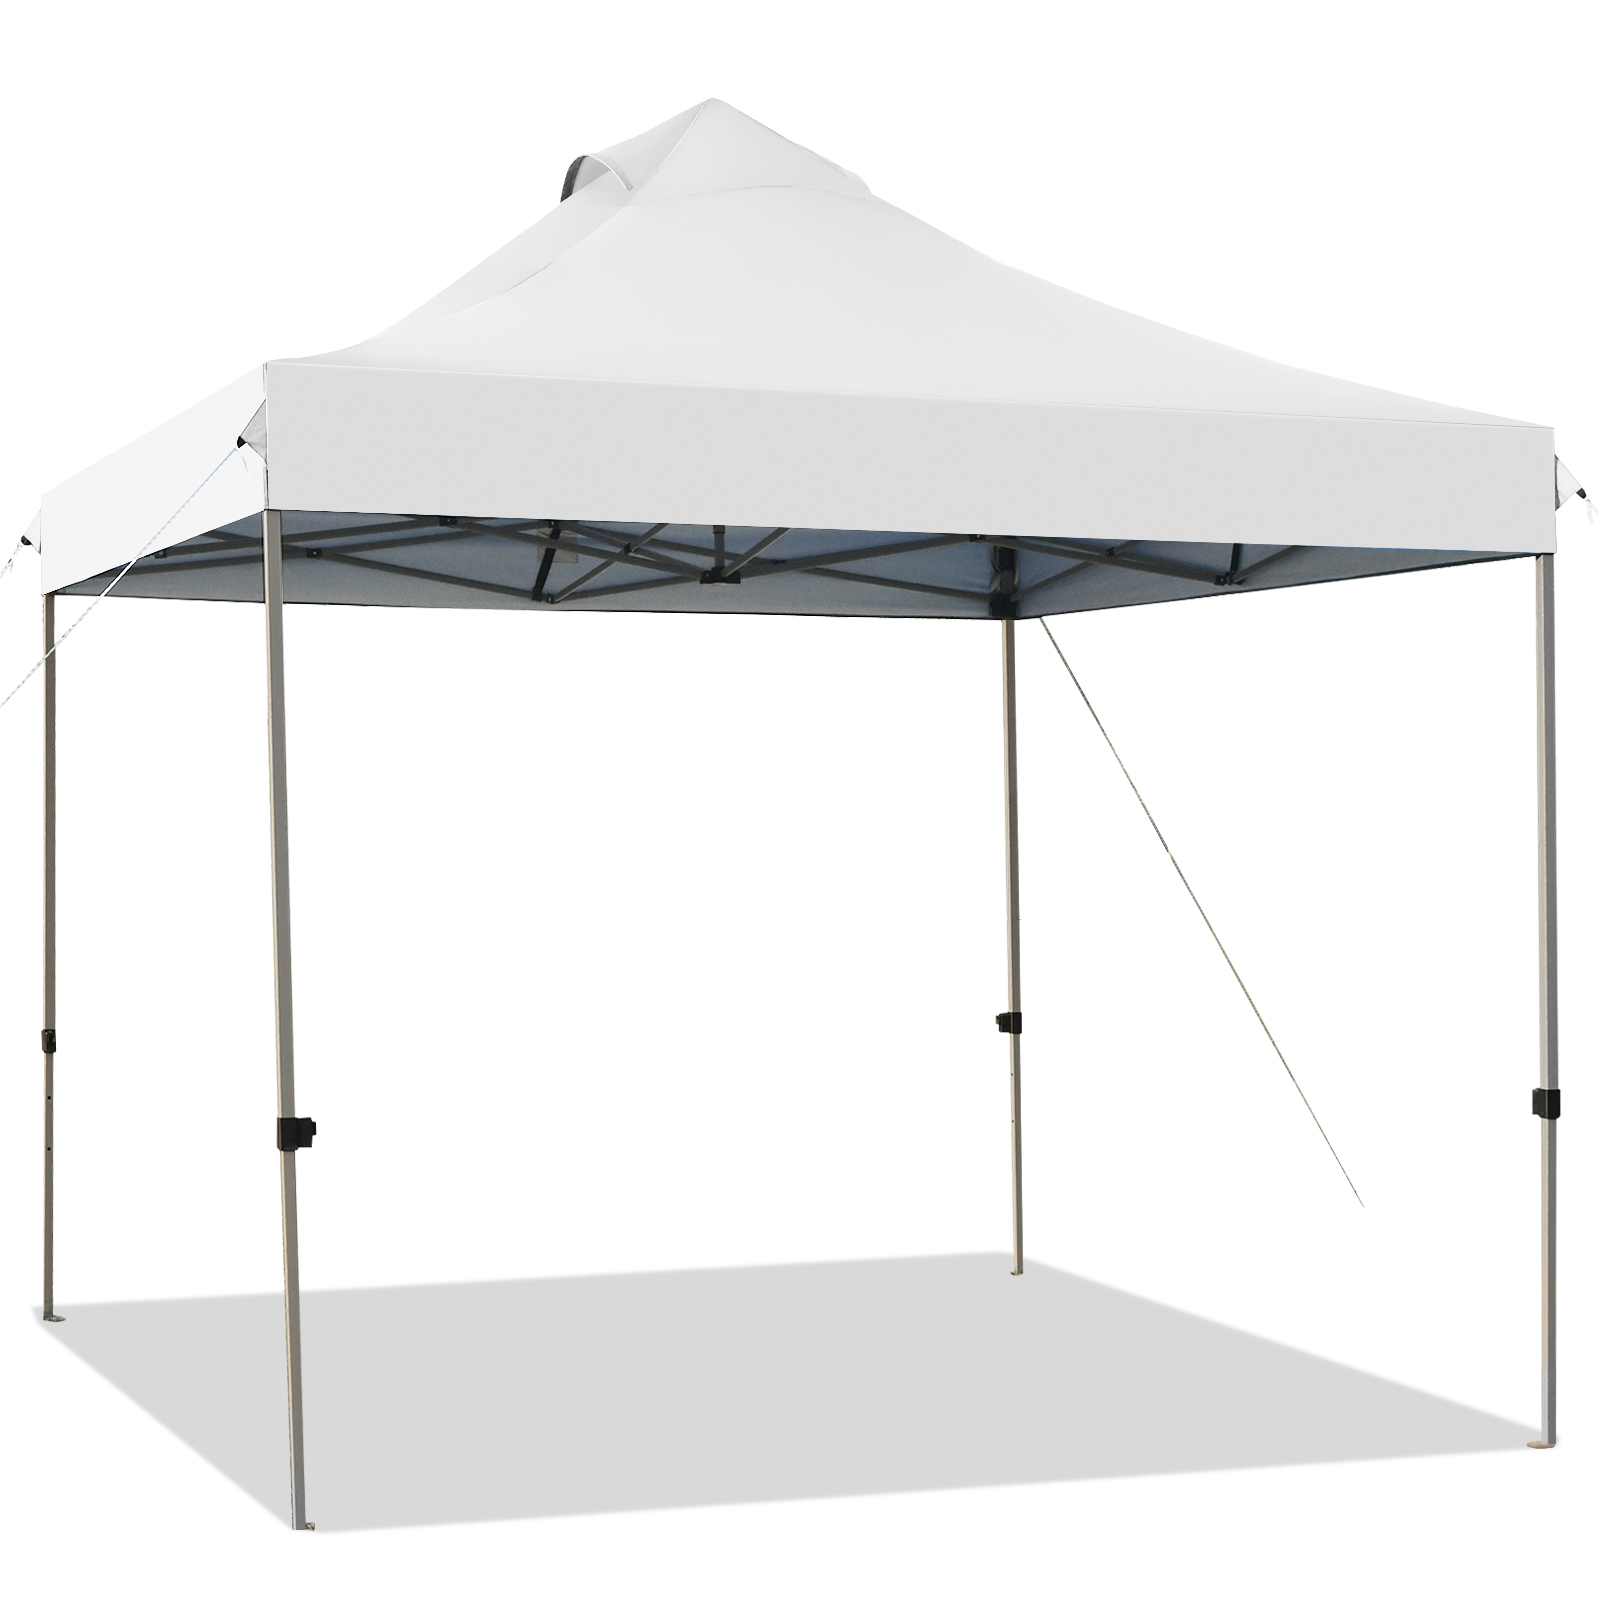 3m_x_3m_Pop_Up_Canopy_Tent_Commercial_Instant_Shelter_White-3.jpg